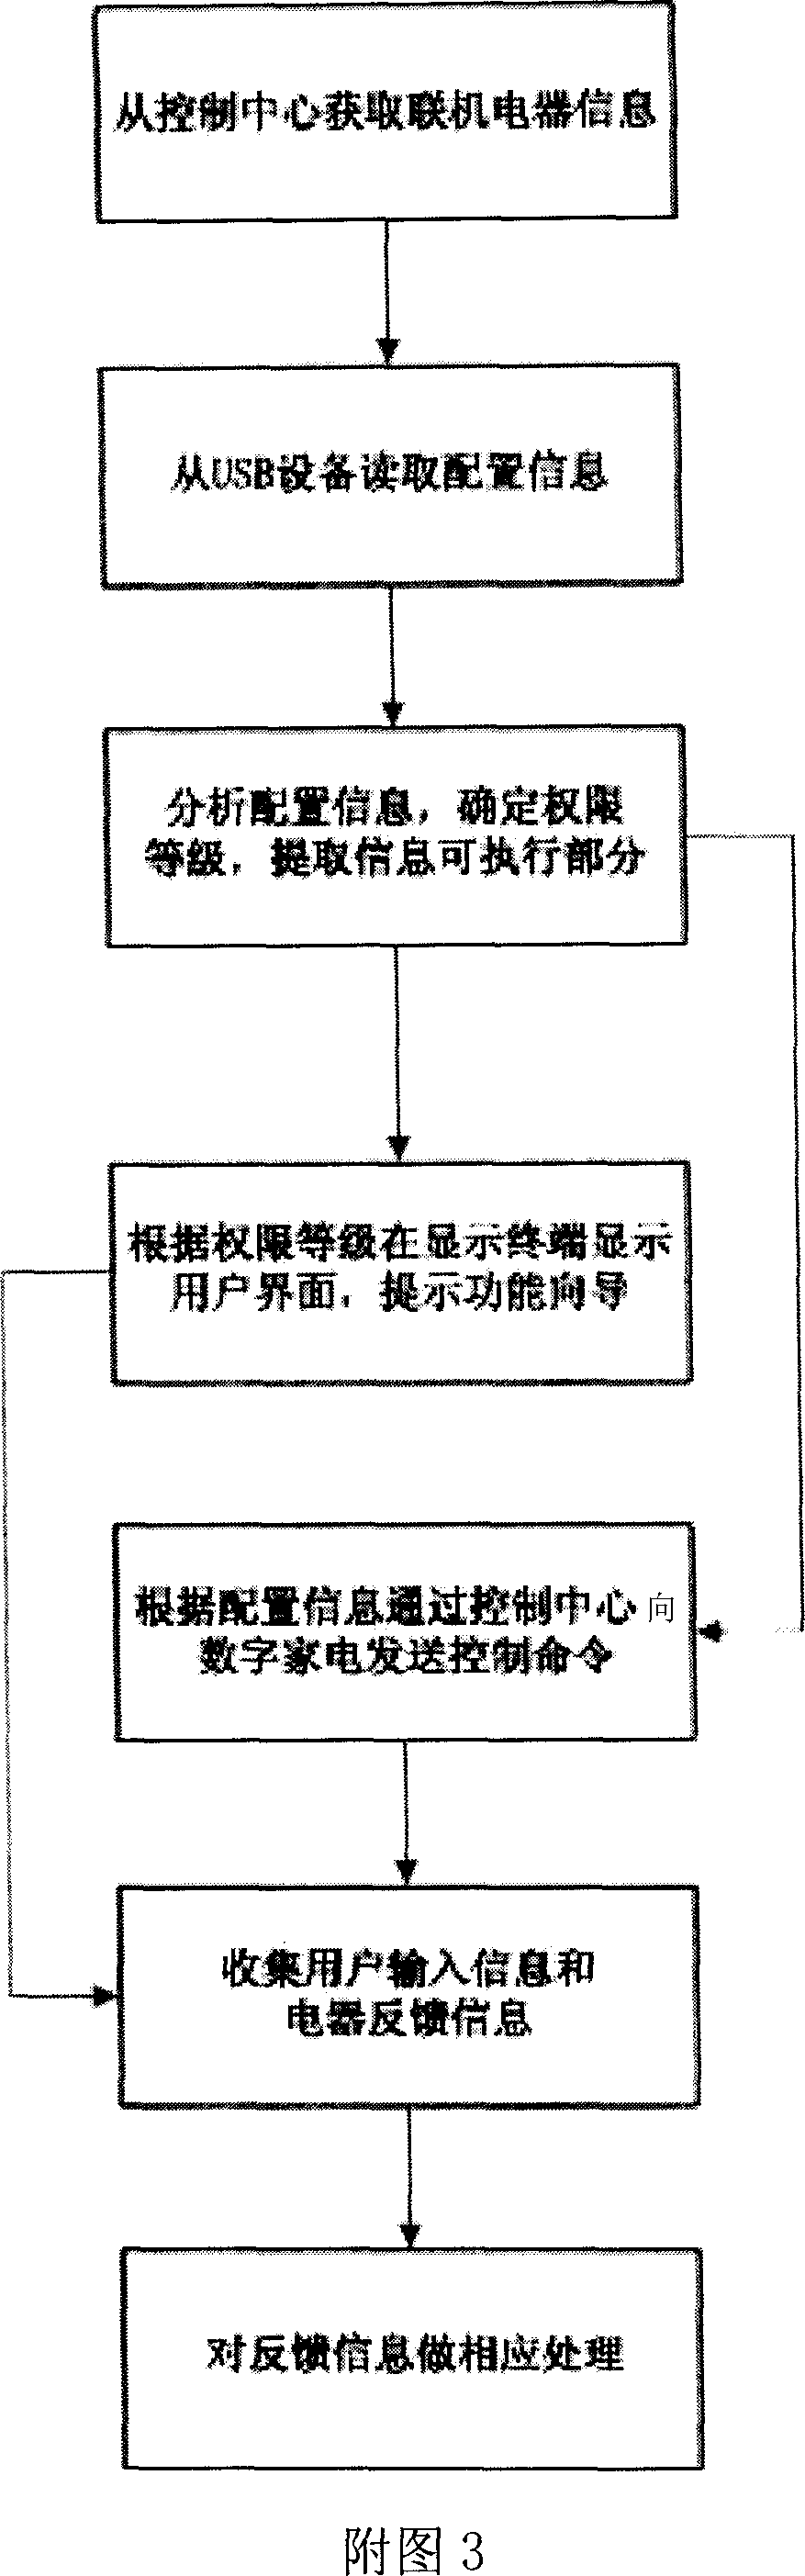 Apparatus and method for controlling digital household electrical appliance use authority by family members